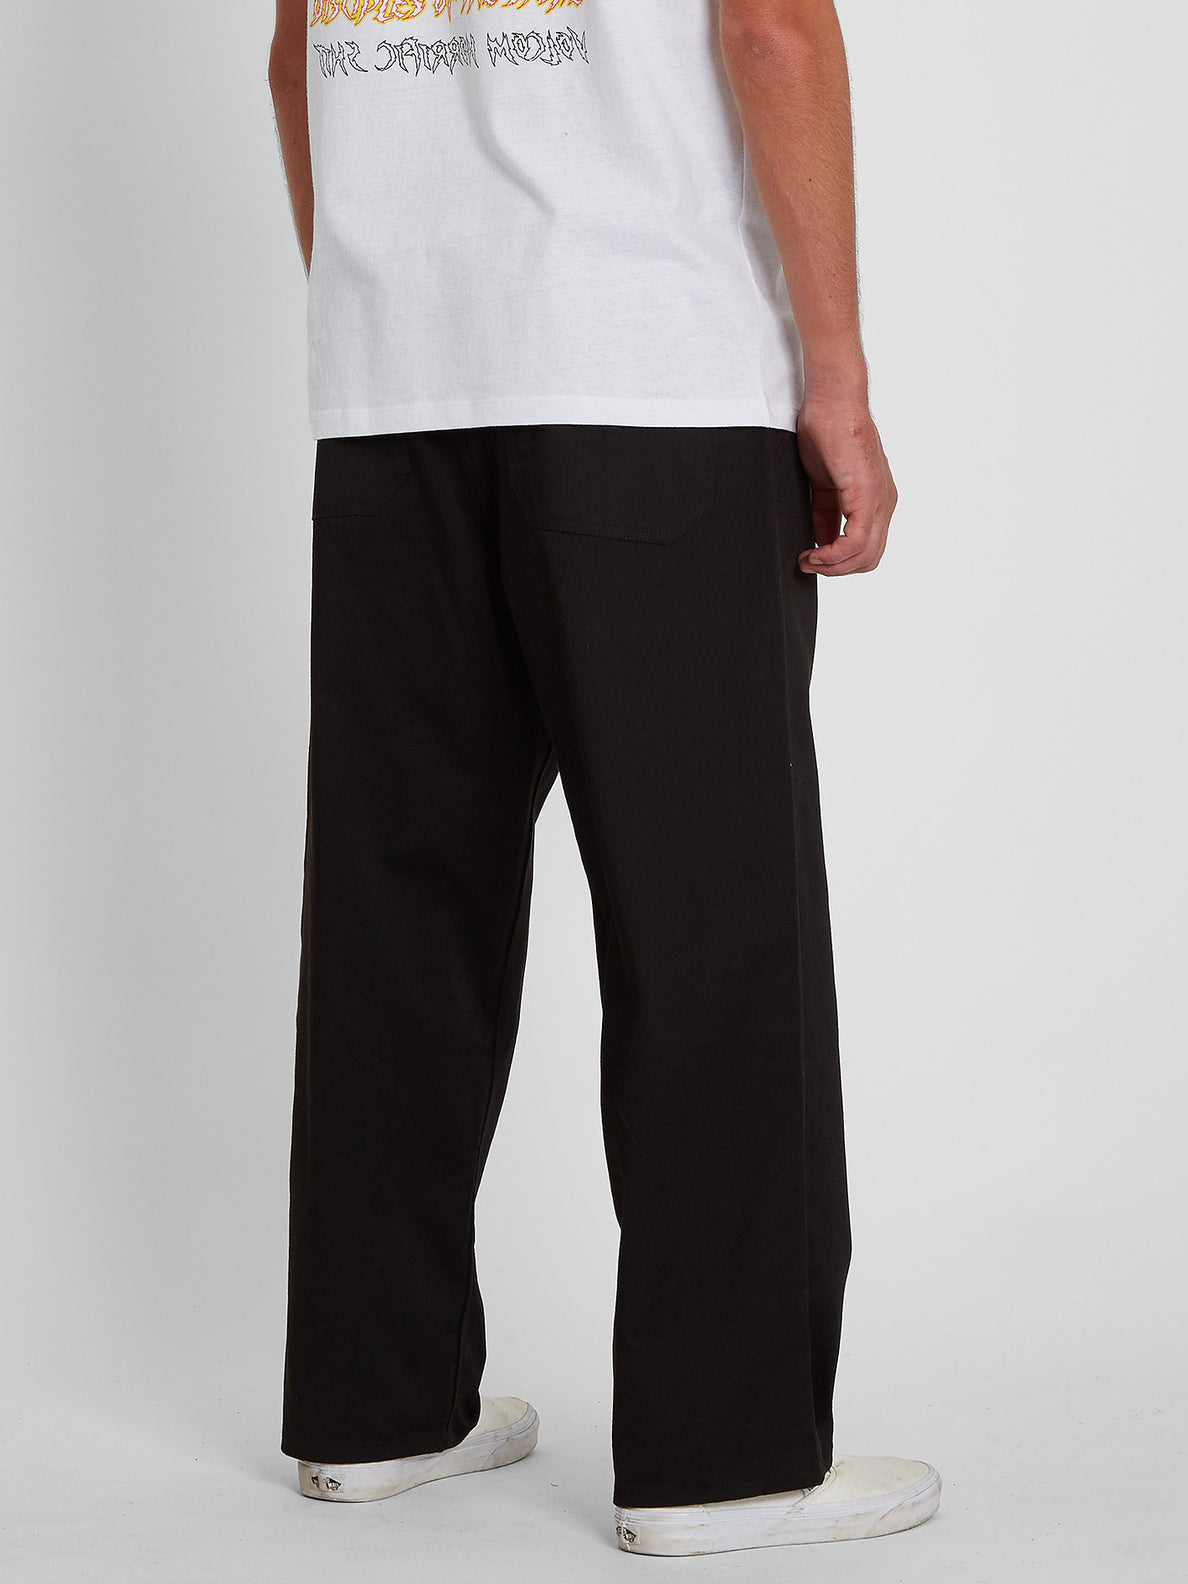 Outer Spaced Solid Pant - BLACK (A1242004_BLK) [2]